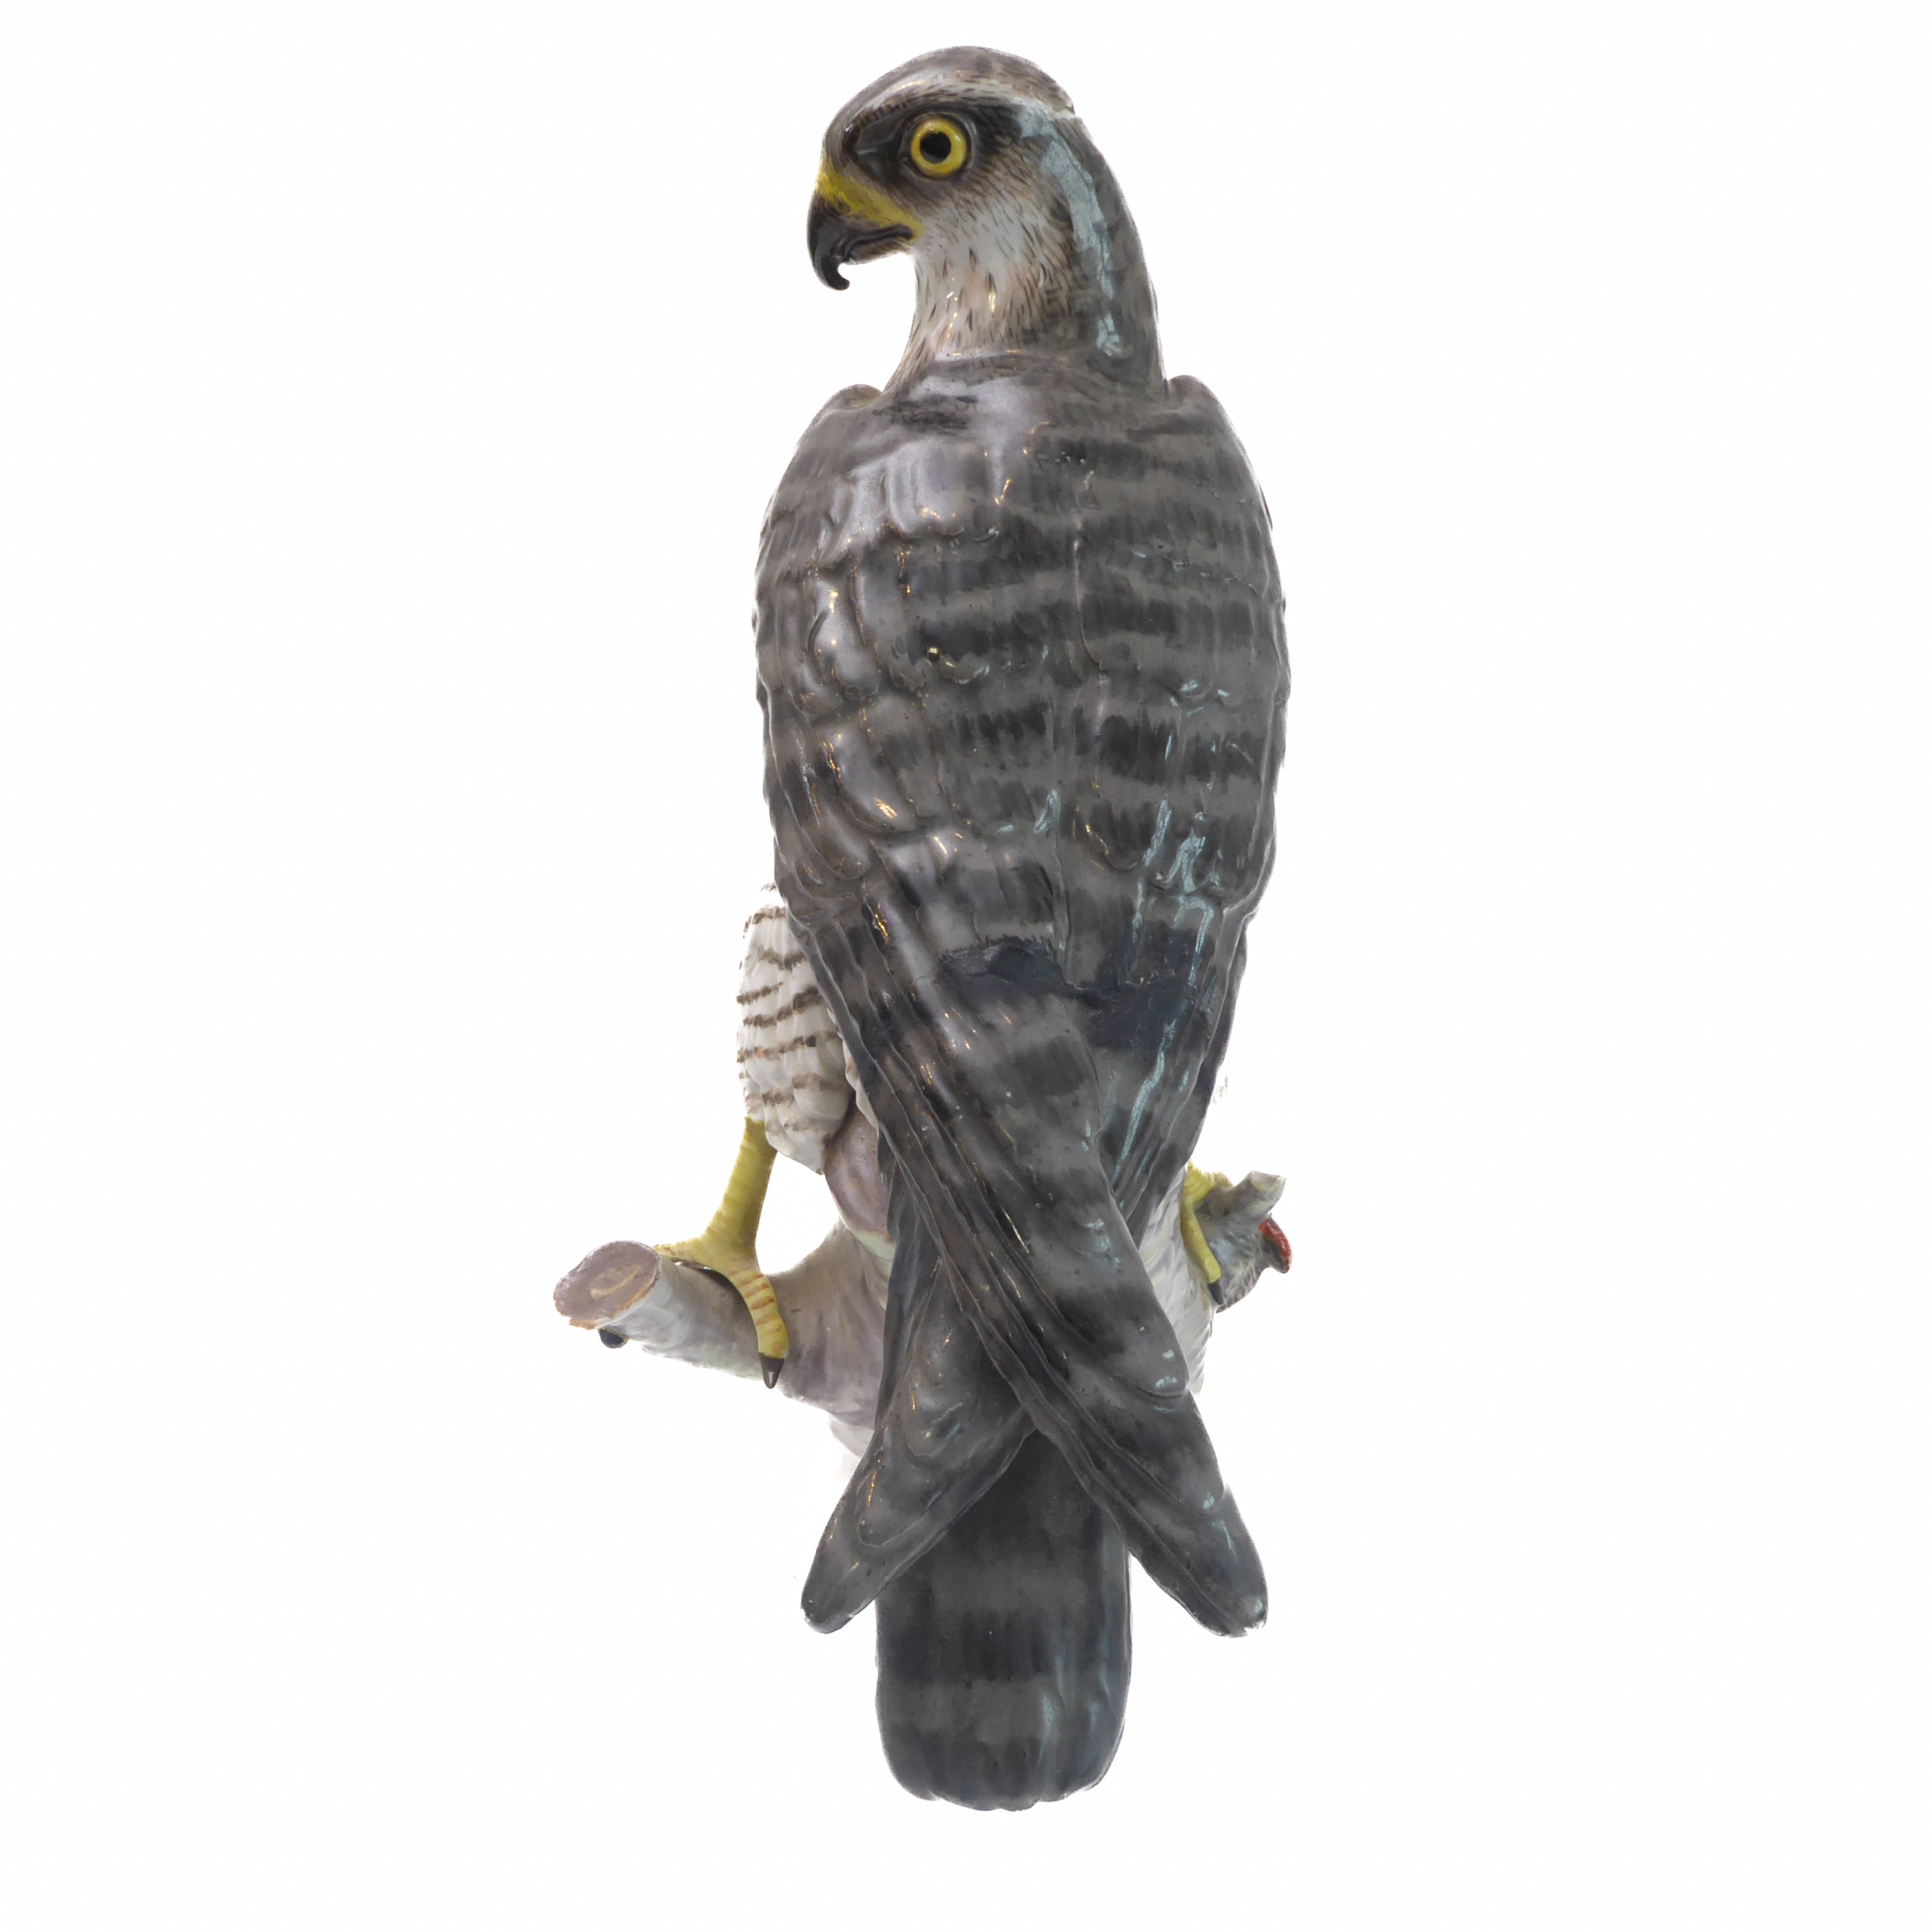 An early 20th century hand-decorated German porcelain model of a goshawk perched on a branch with - Image 4 of 9